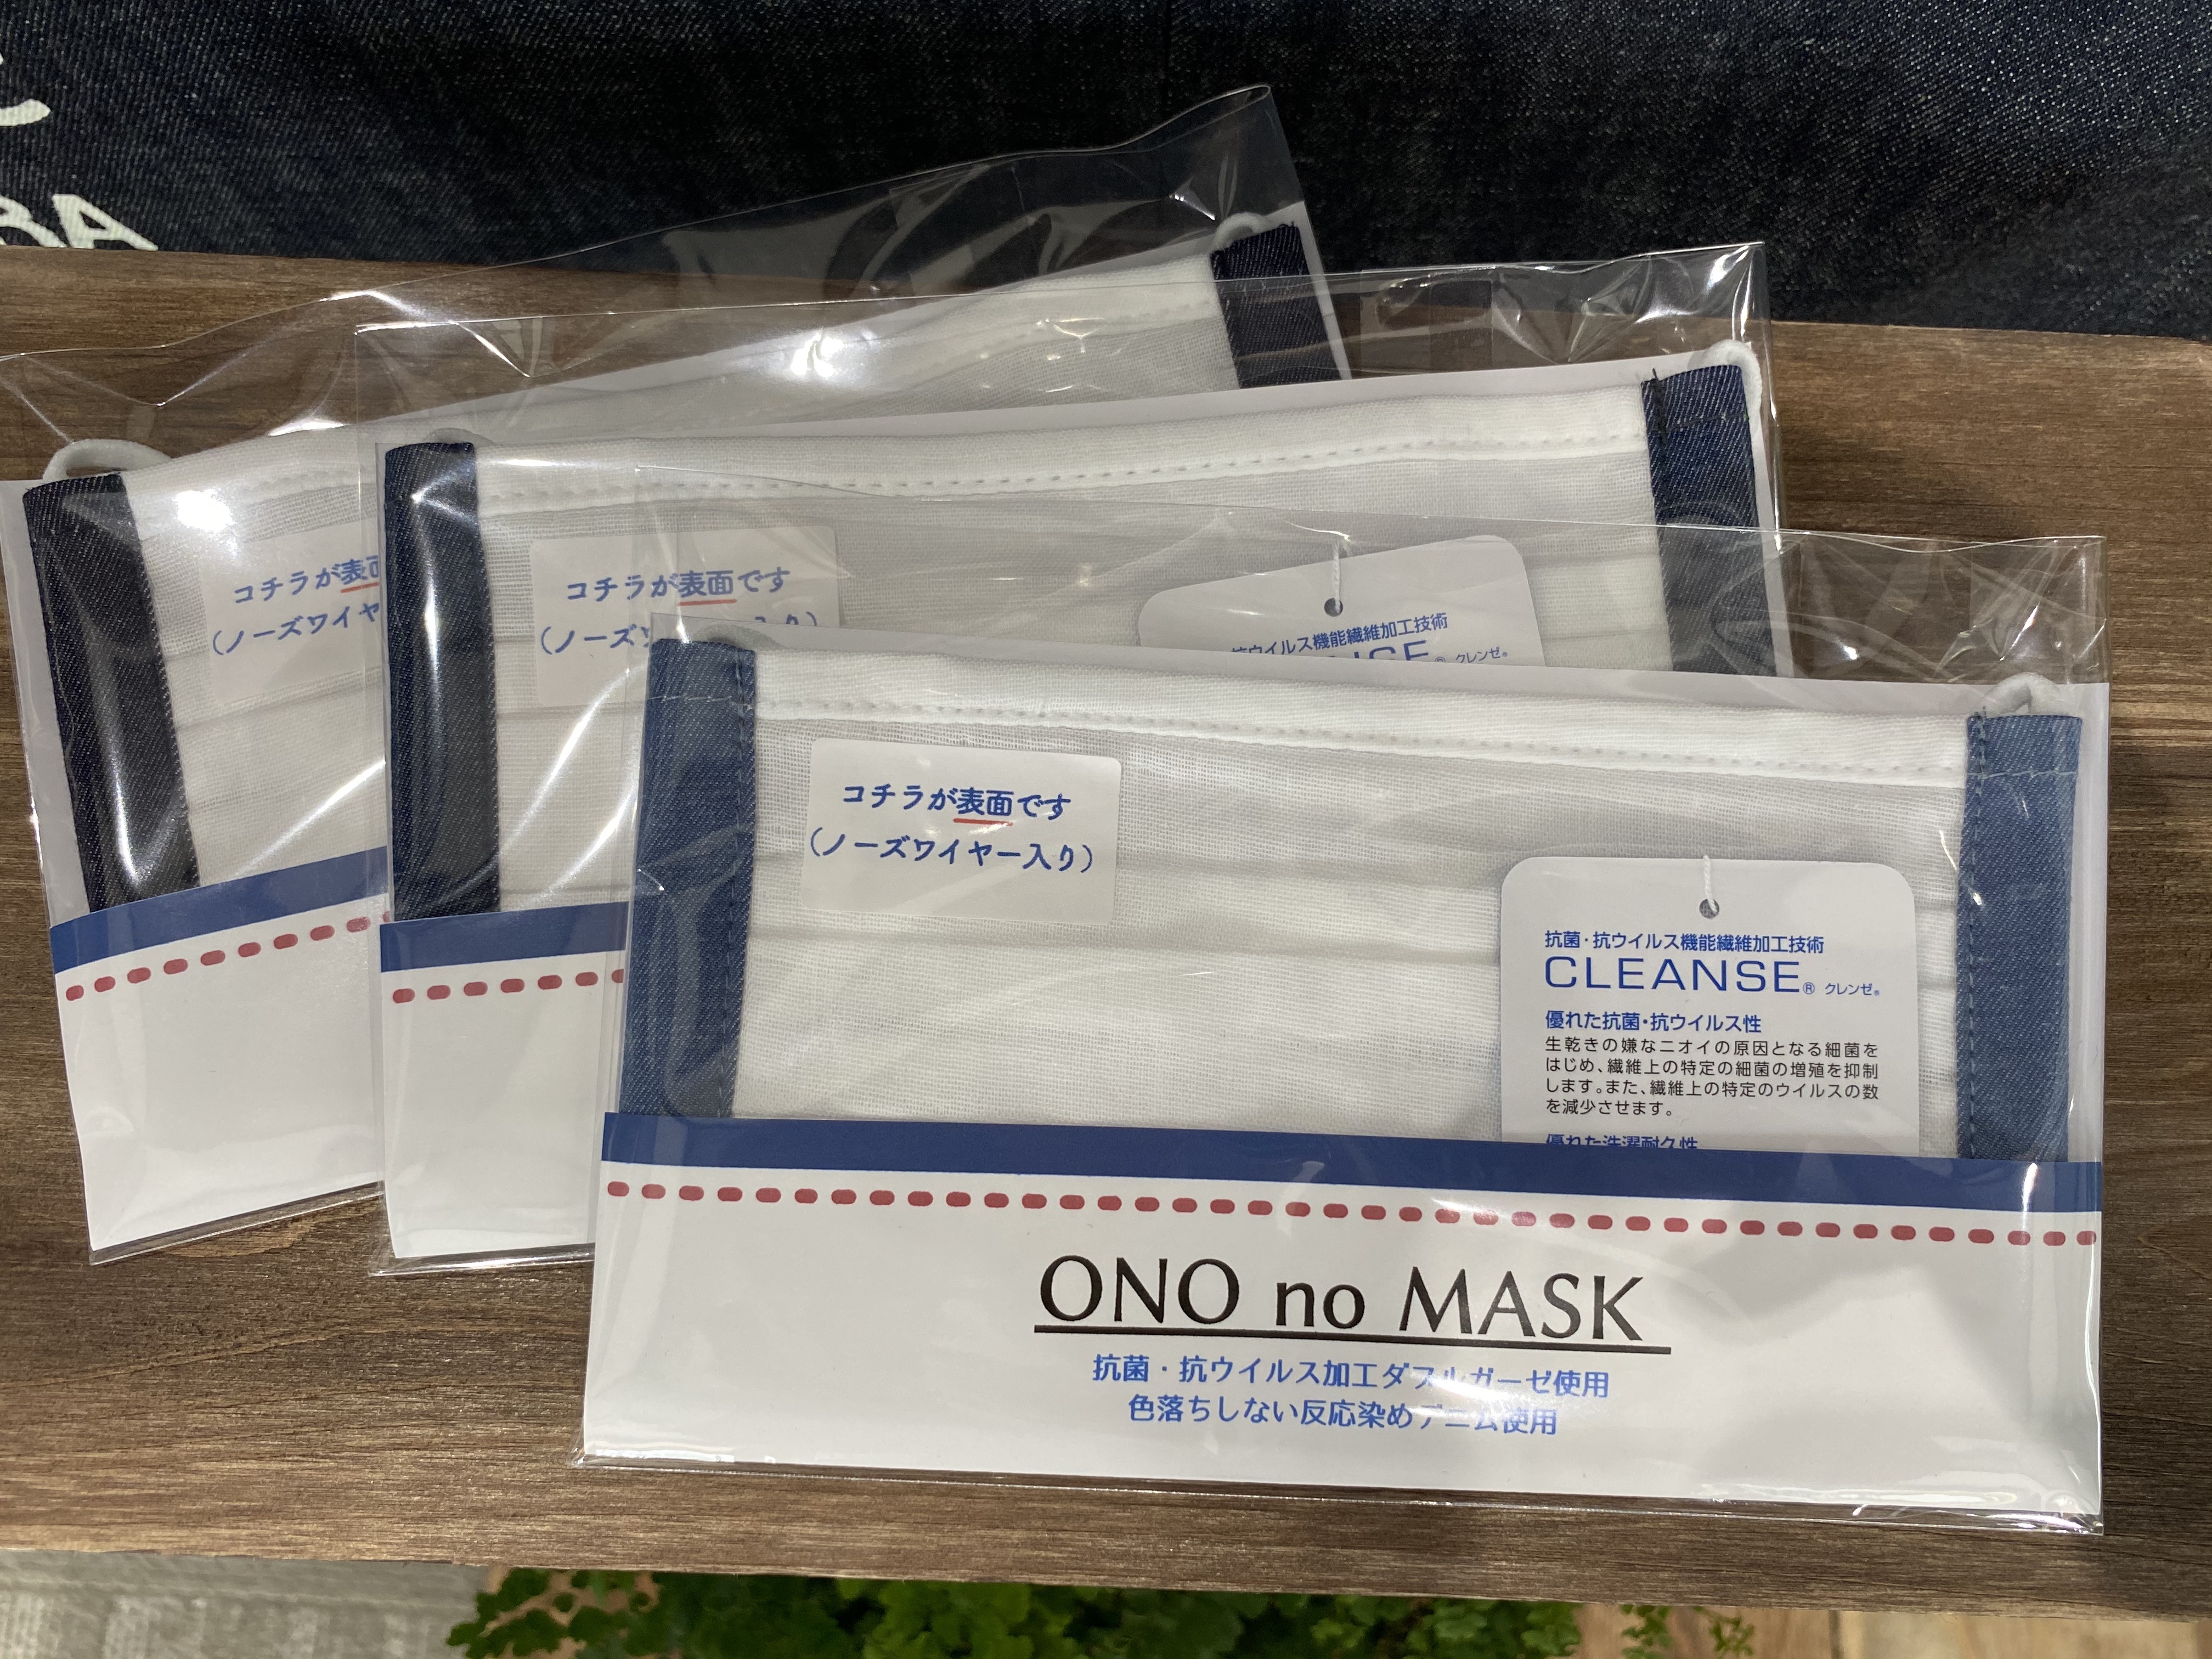 【ONO no MASK】online shopping スタートします！